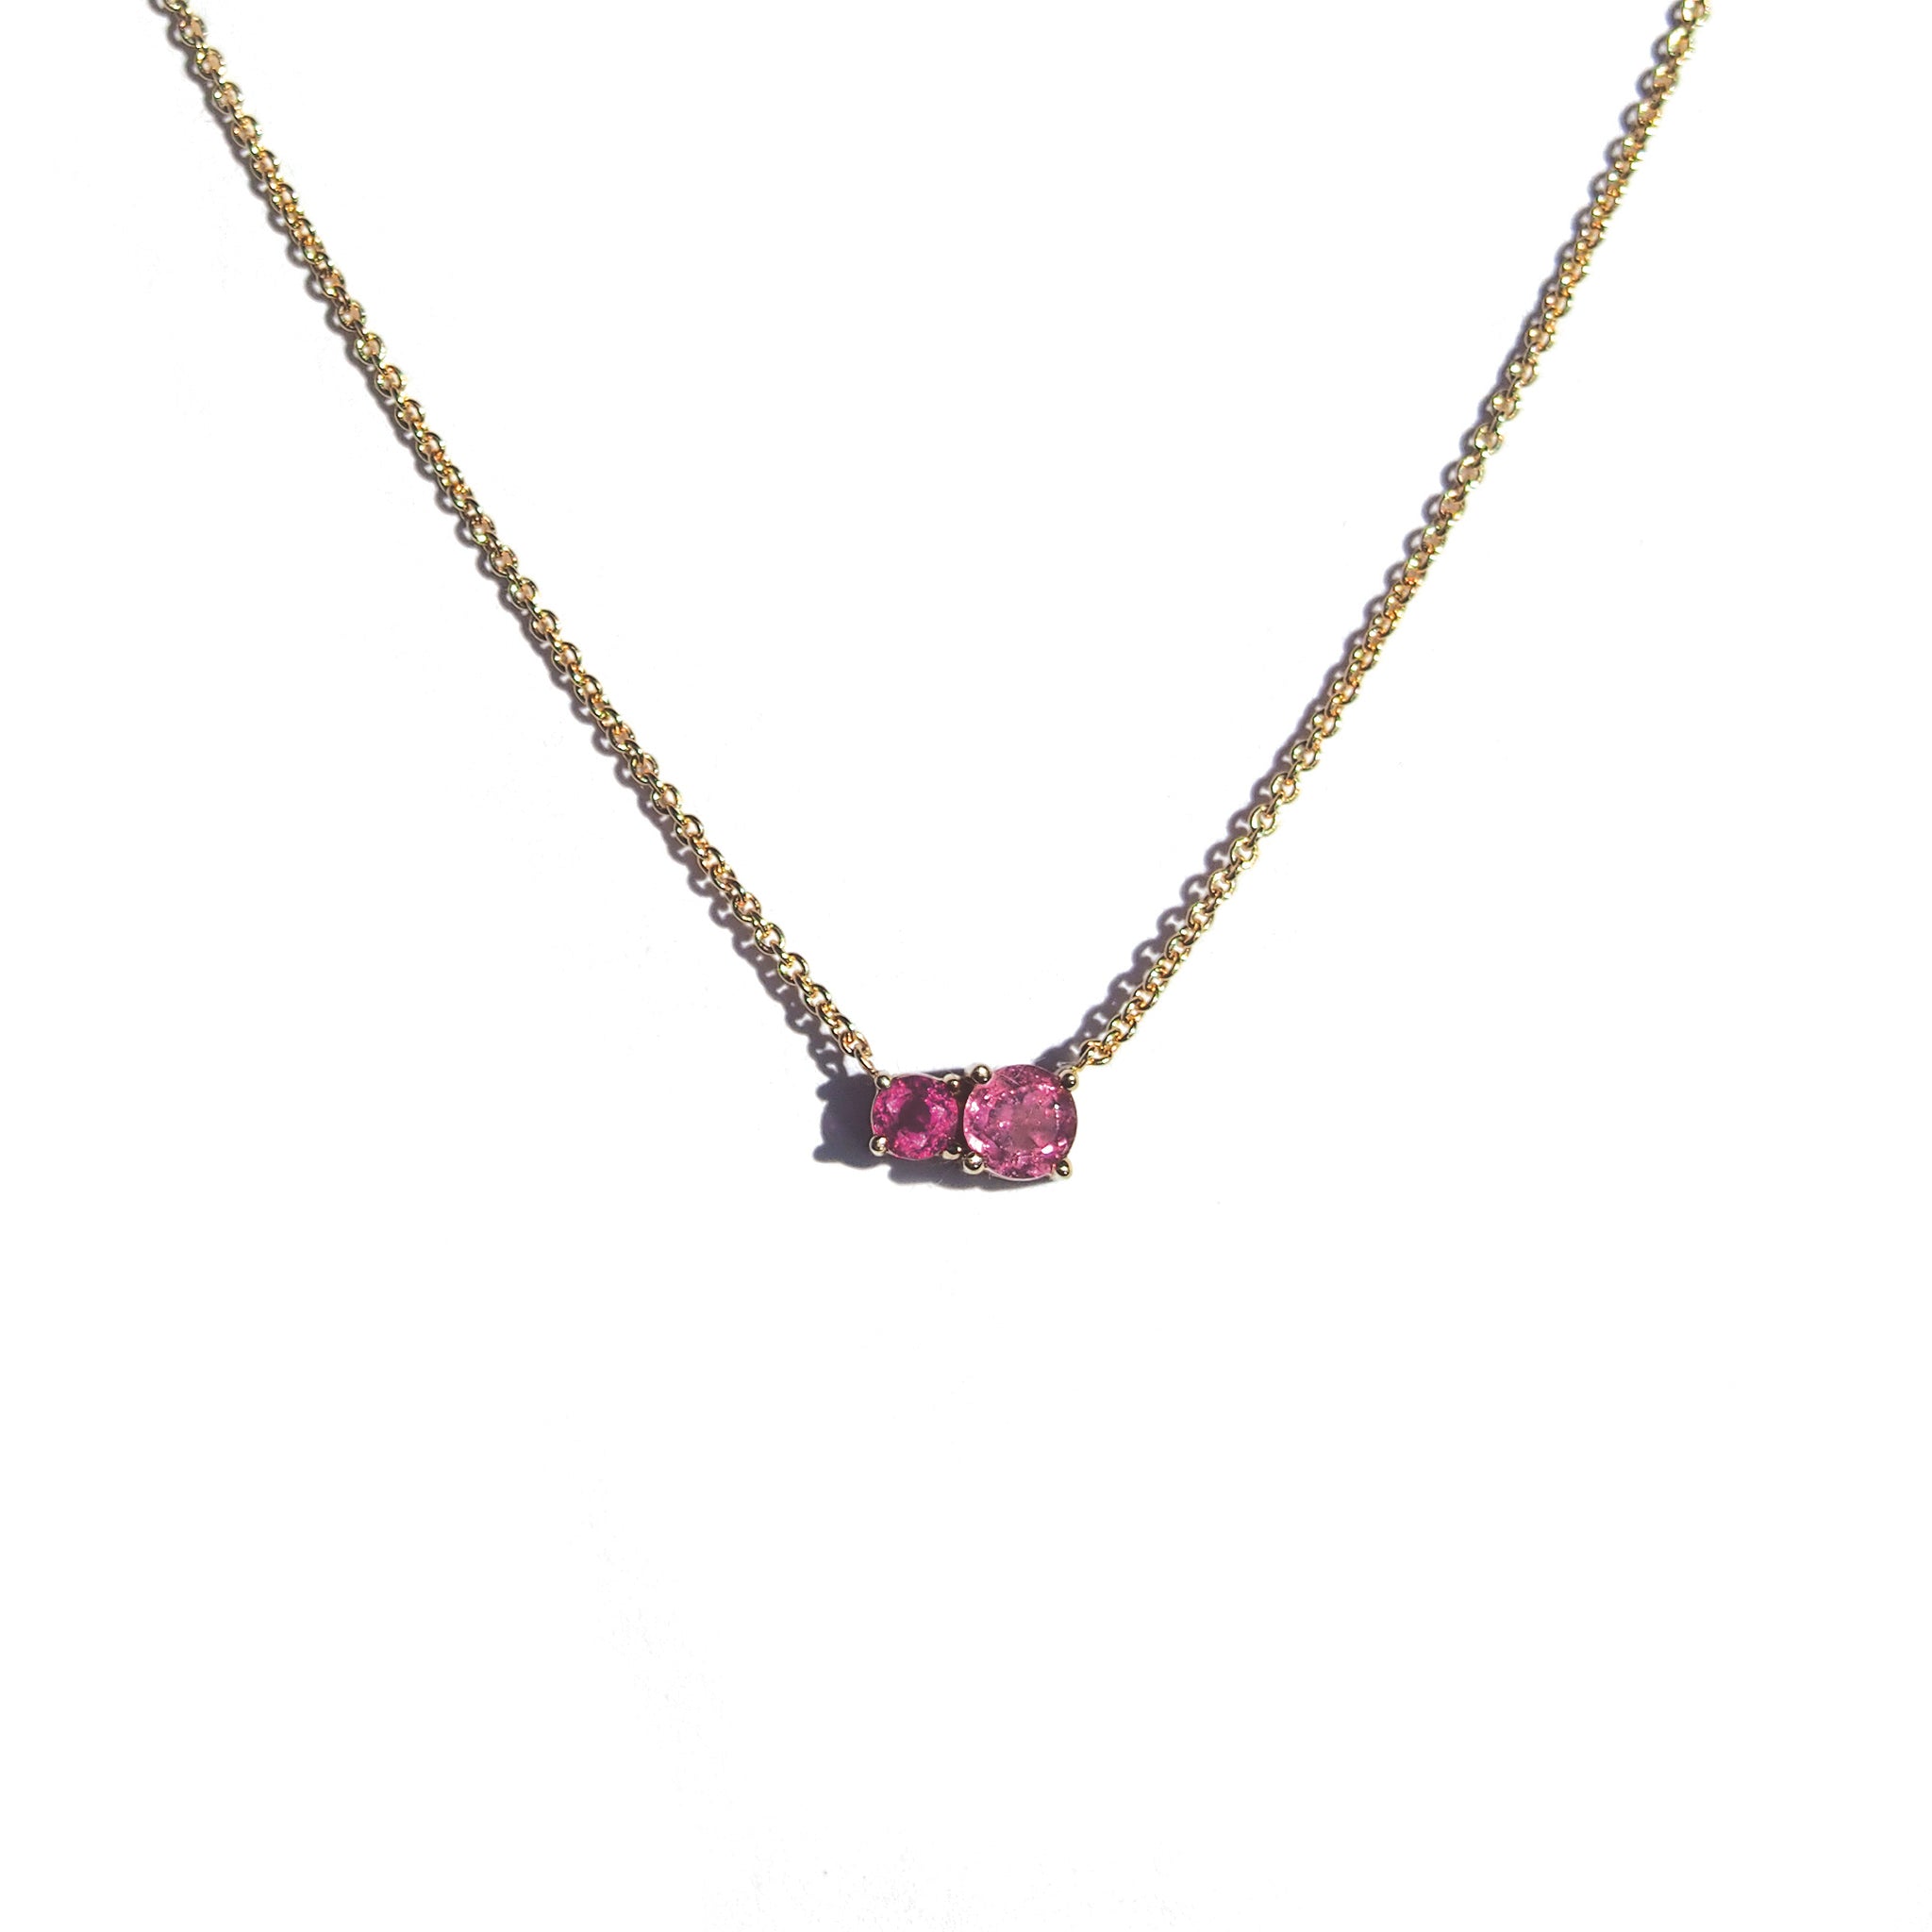 Beautiful 2 stone necklace in solid 14k yellow gold with genuine pink tourmaline and rubelite by Lico Jewelry in Montreal.